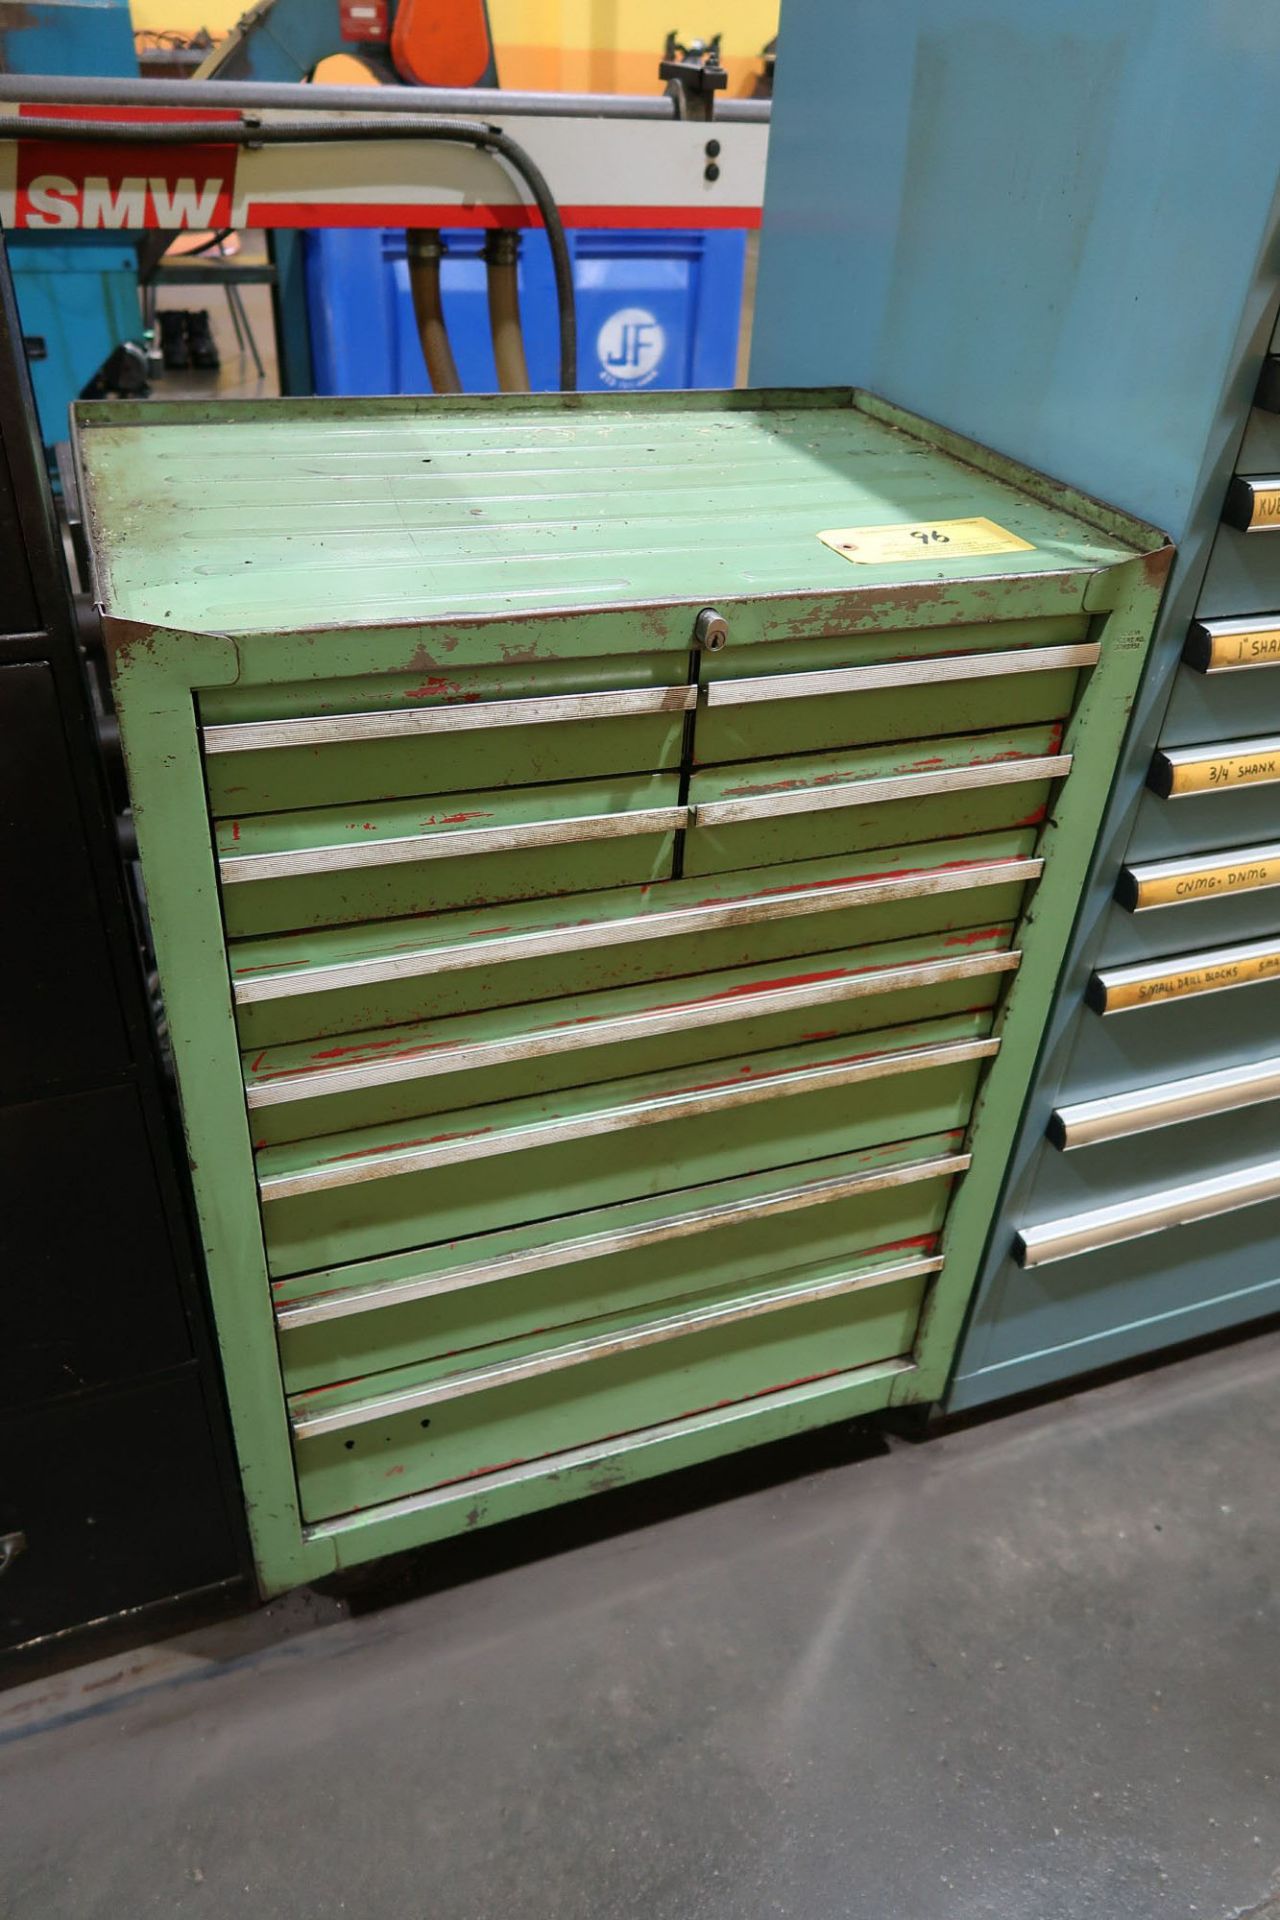 9-DRAWER LISTA LIKE CABINET W/ CONTENTS INCLUDING: DRILLS, REAMERS, TAPS, COLLET PADS, BORING